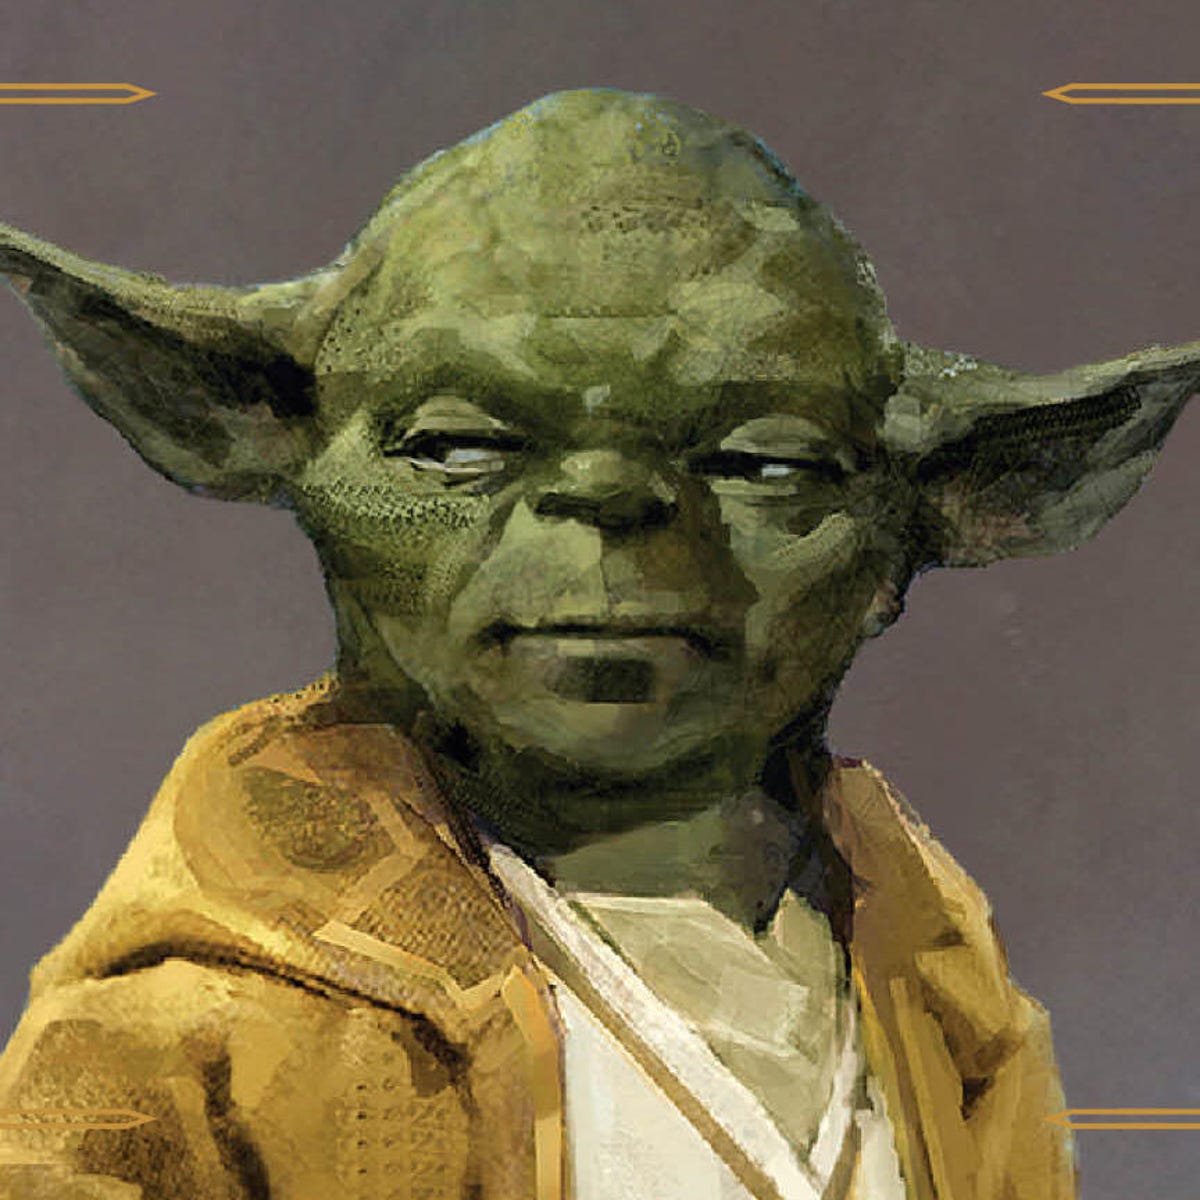 Move over, Baby Yoda. 700-year-old Yoda is here - CNET